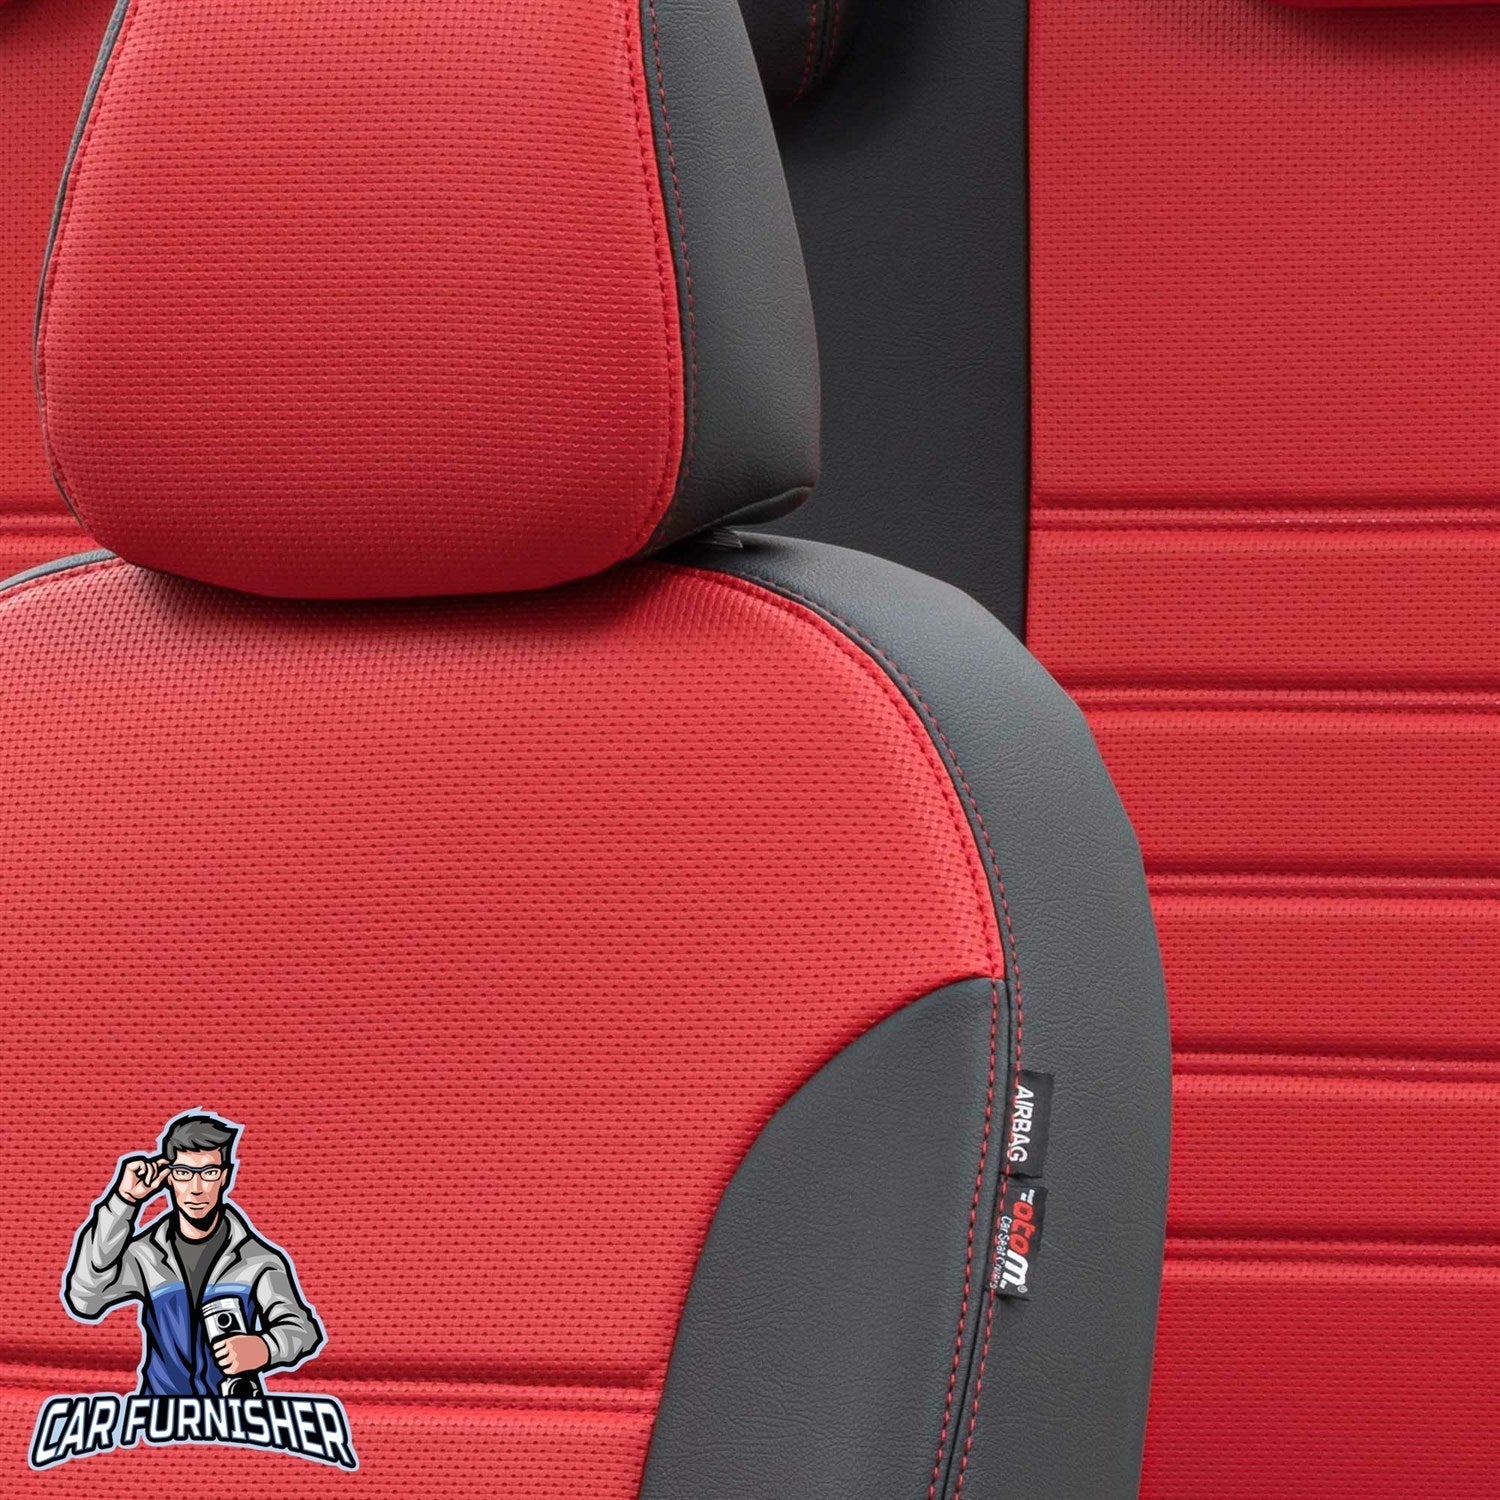 Seat Mii Seat Covers New York Leather Design Red Leather